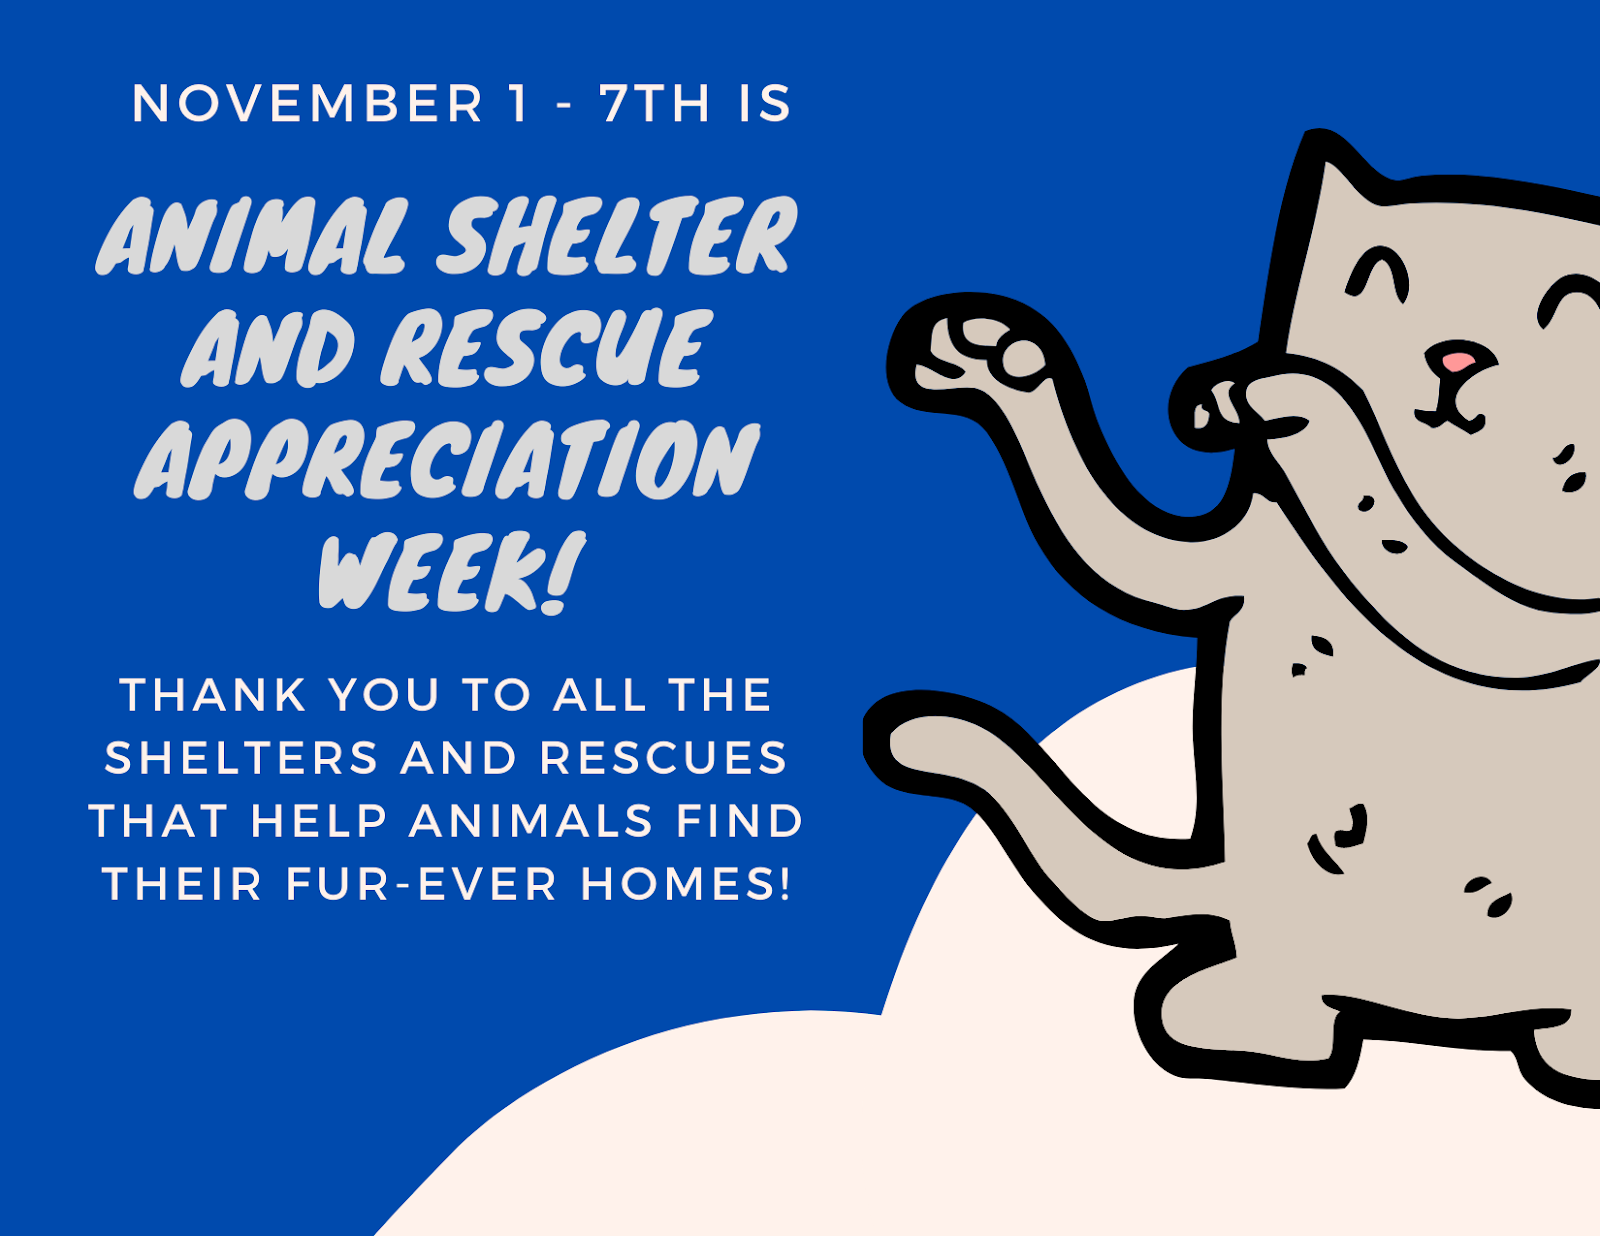 Animal Shelter and Rescue Appreciation Week